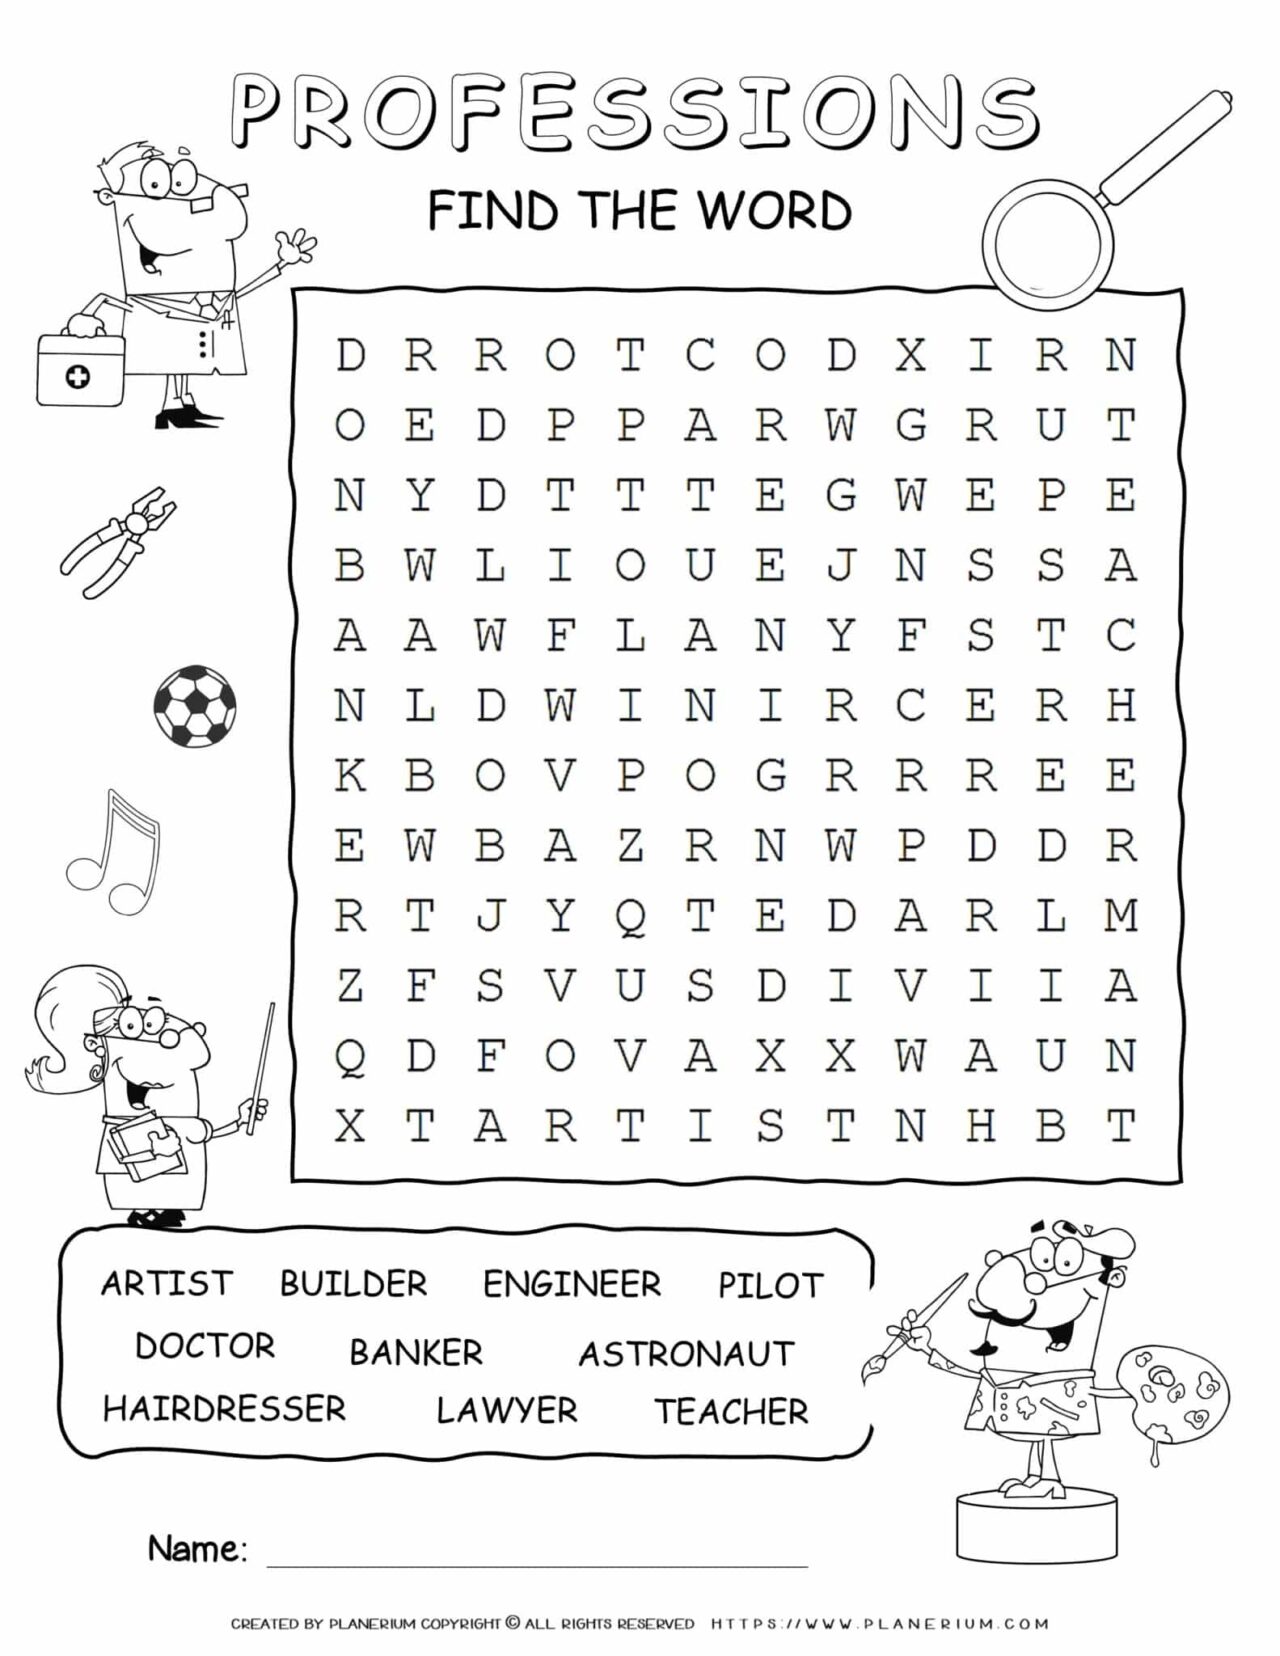 Professions Word Search Ten Words | Planerium